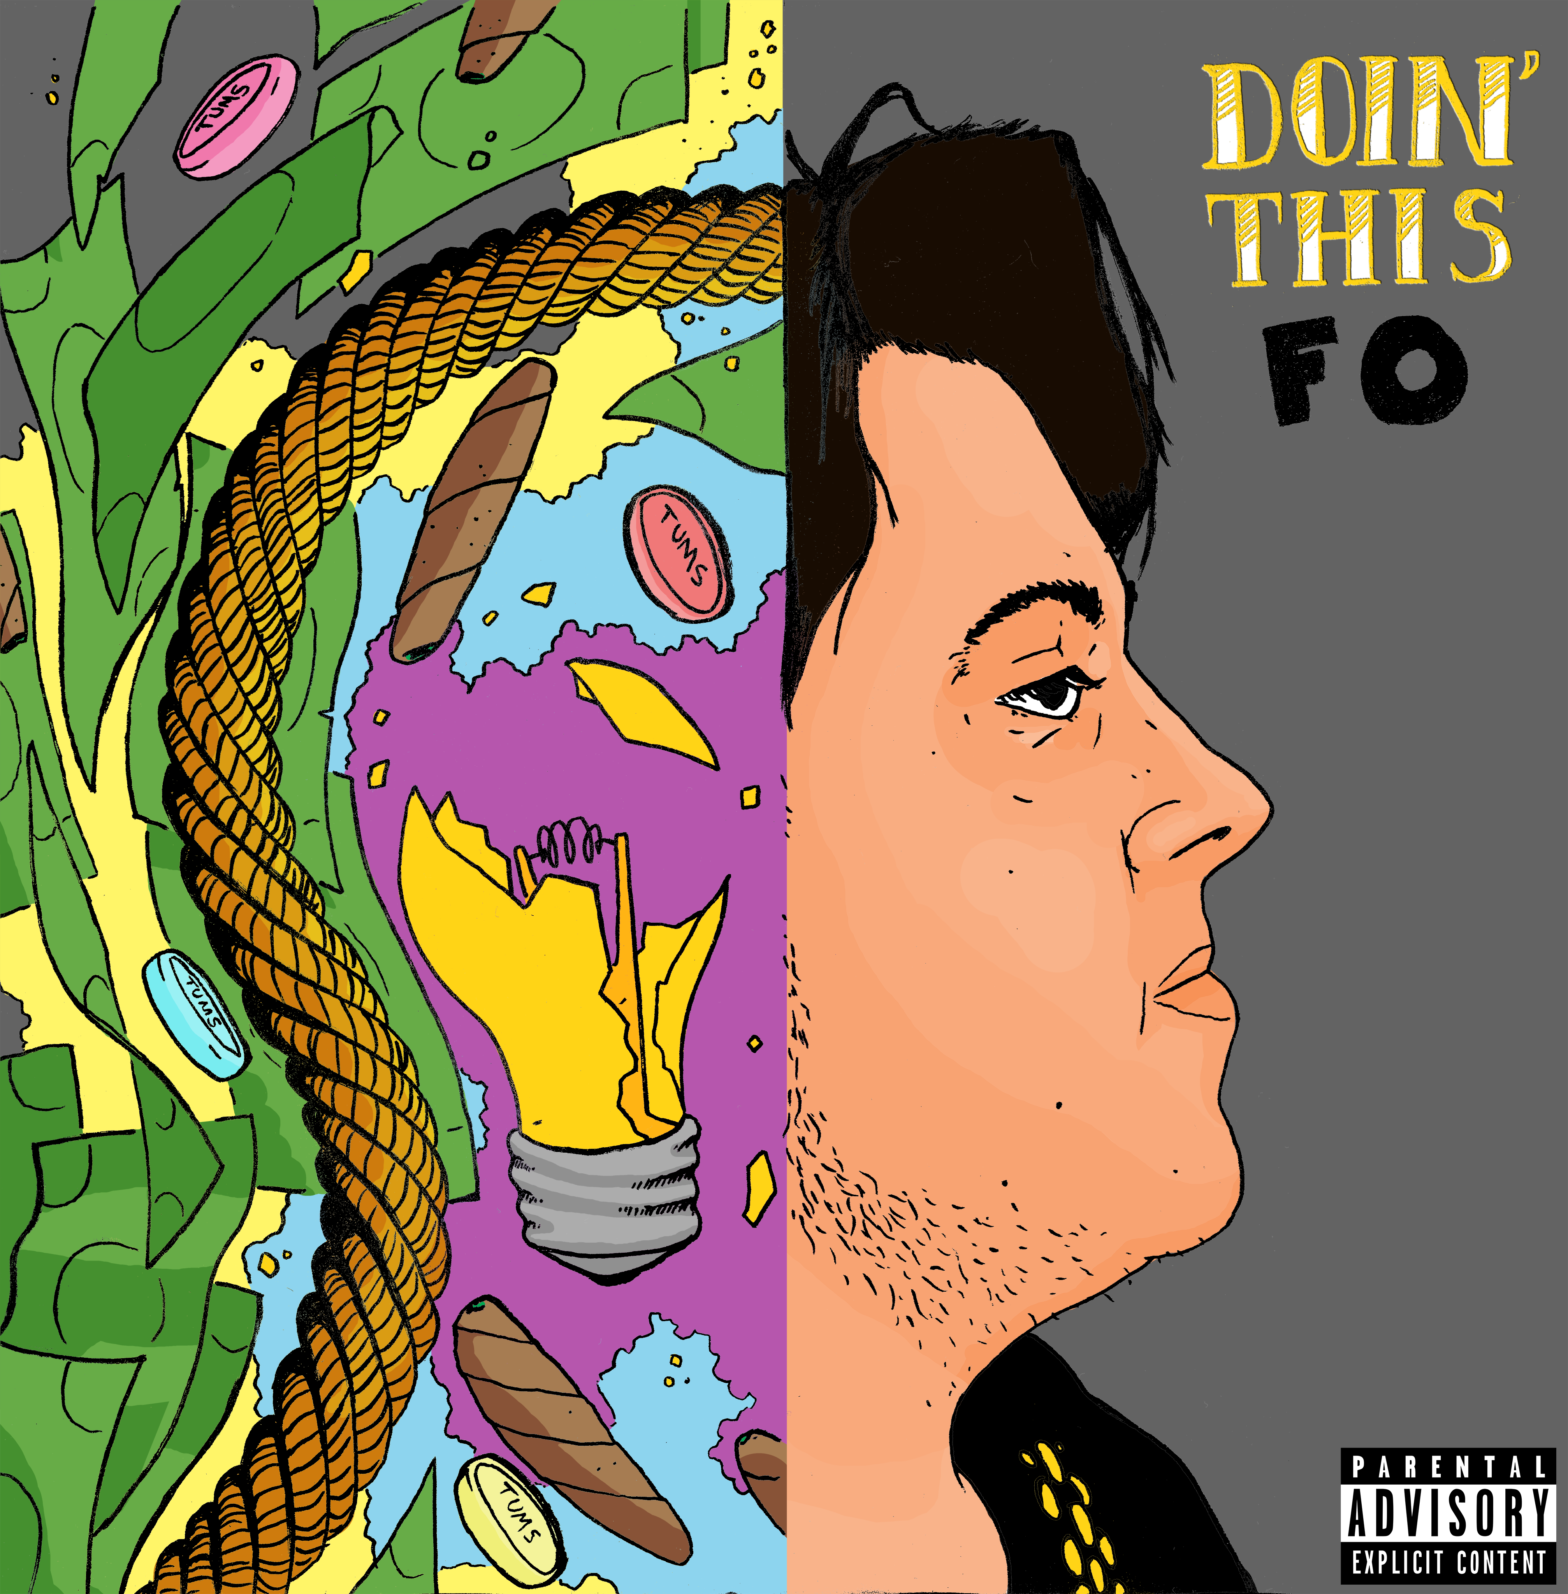 “Doin’ This” Cover Art